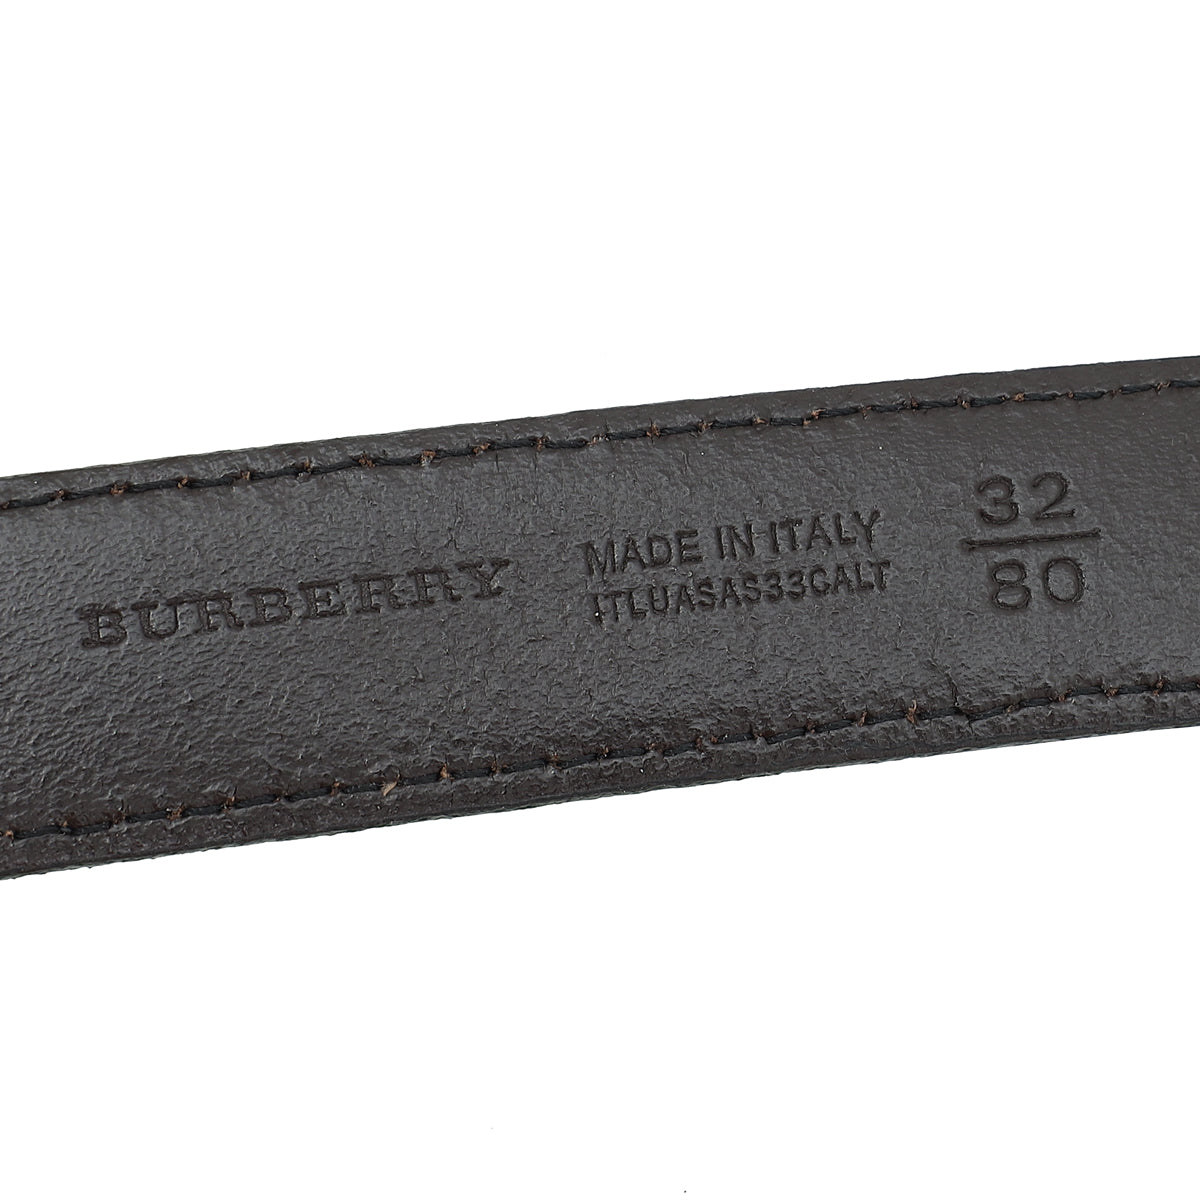 Burberry Bicolor House Check Buckle Belt 32